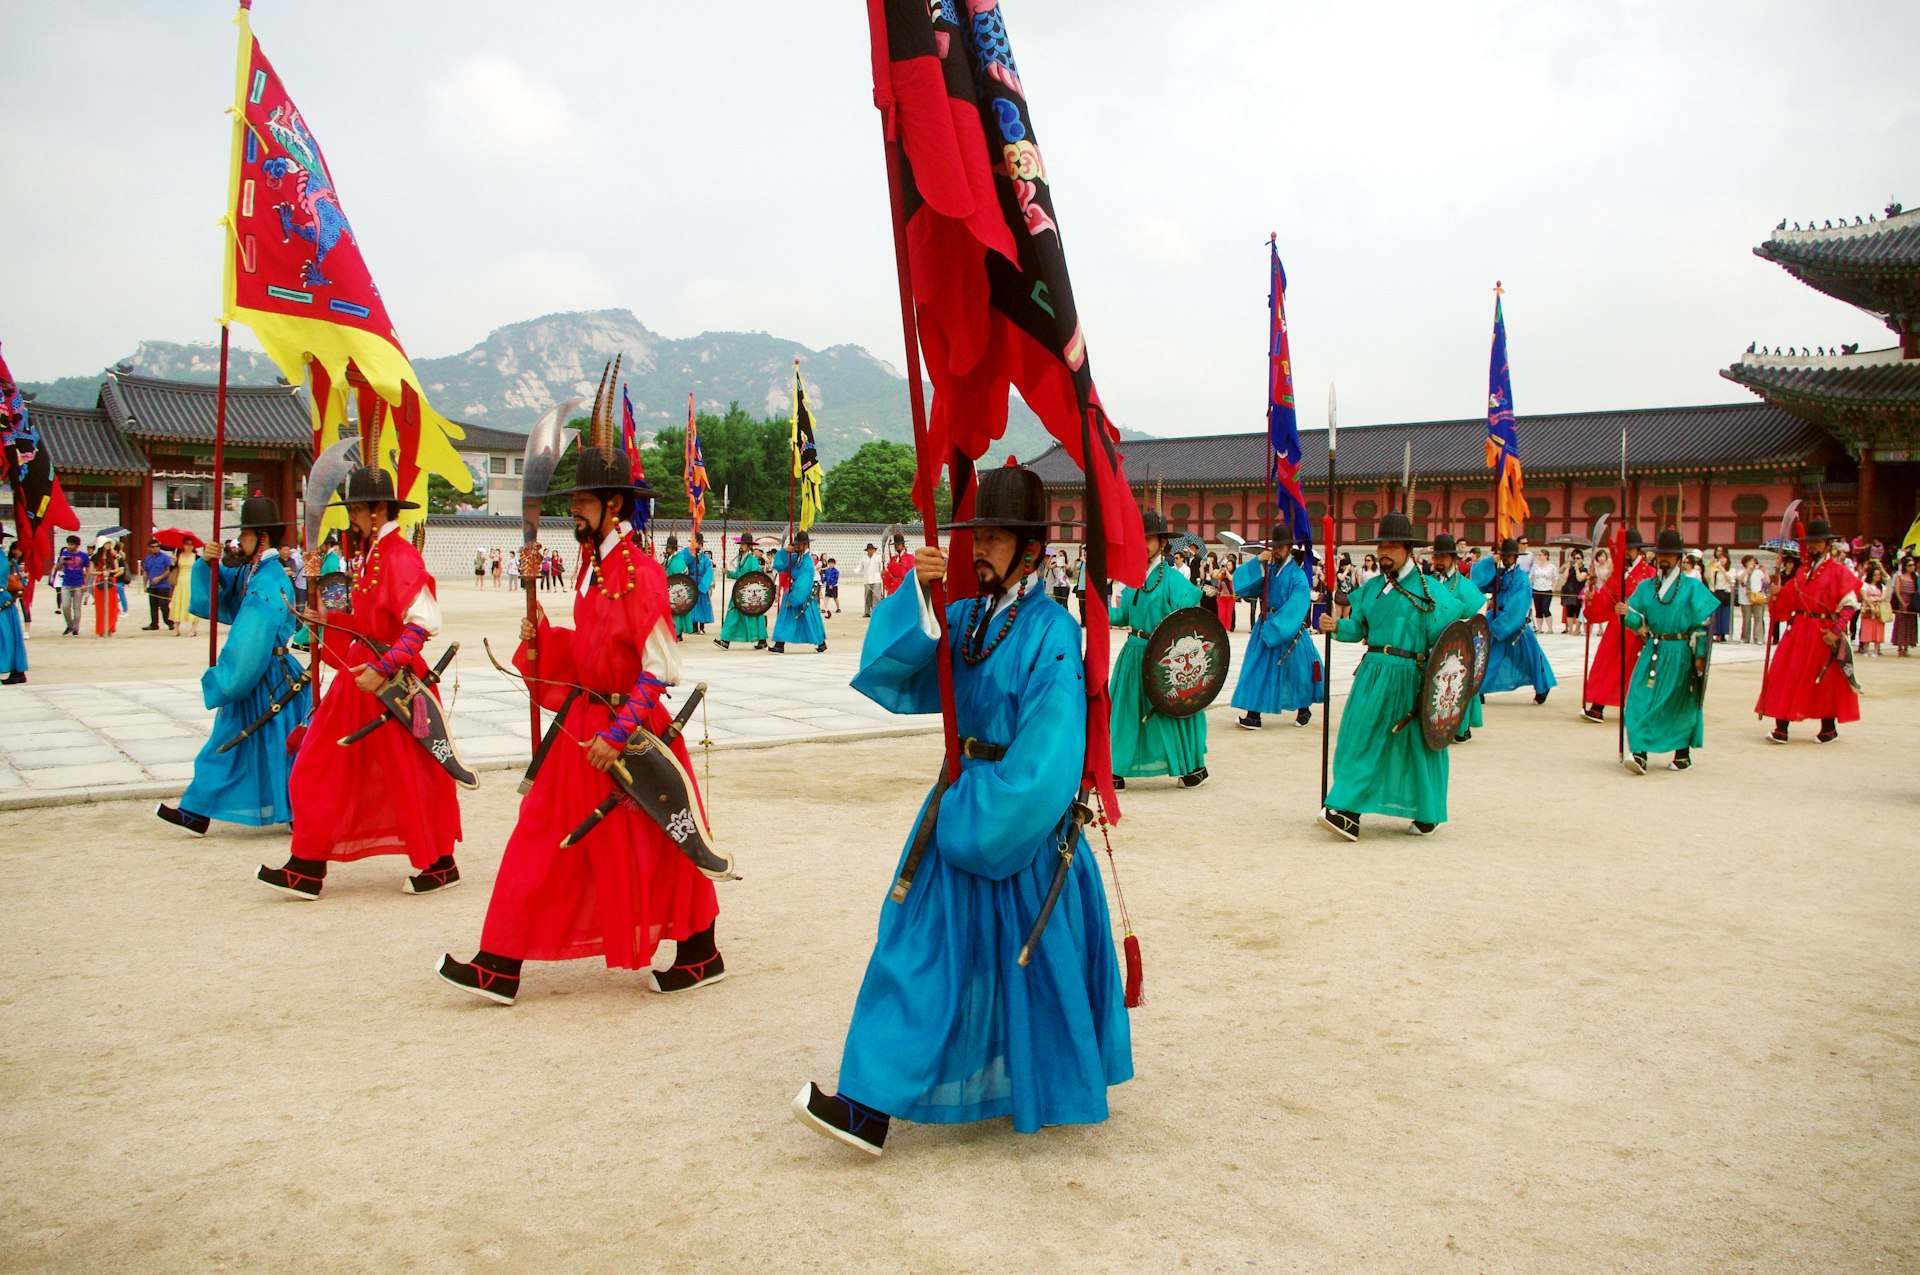 Soldiers in historic uniforms and carrying pennants participate in the changing of the guard ceremony at Gyeongbokgung Palace, Seoul, South Korea